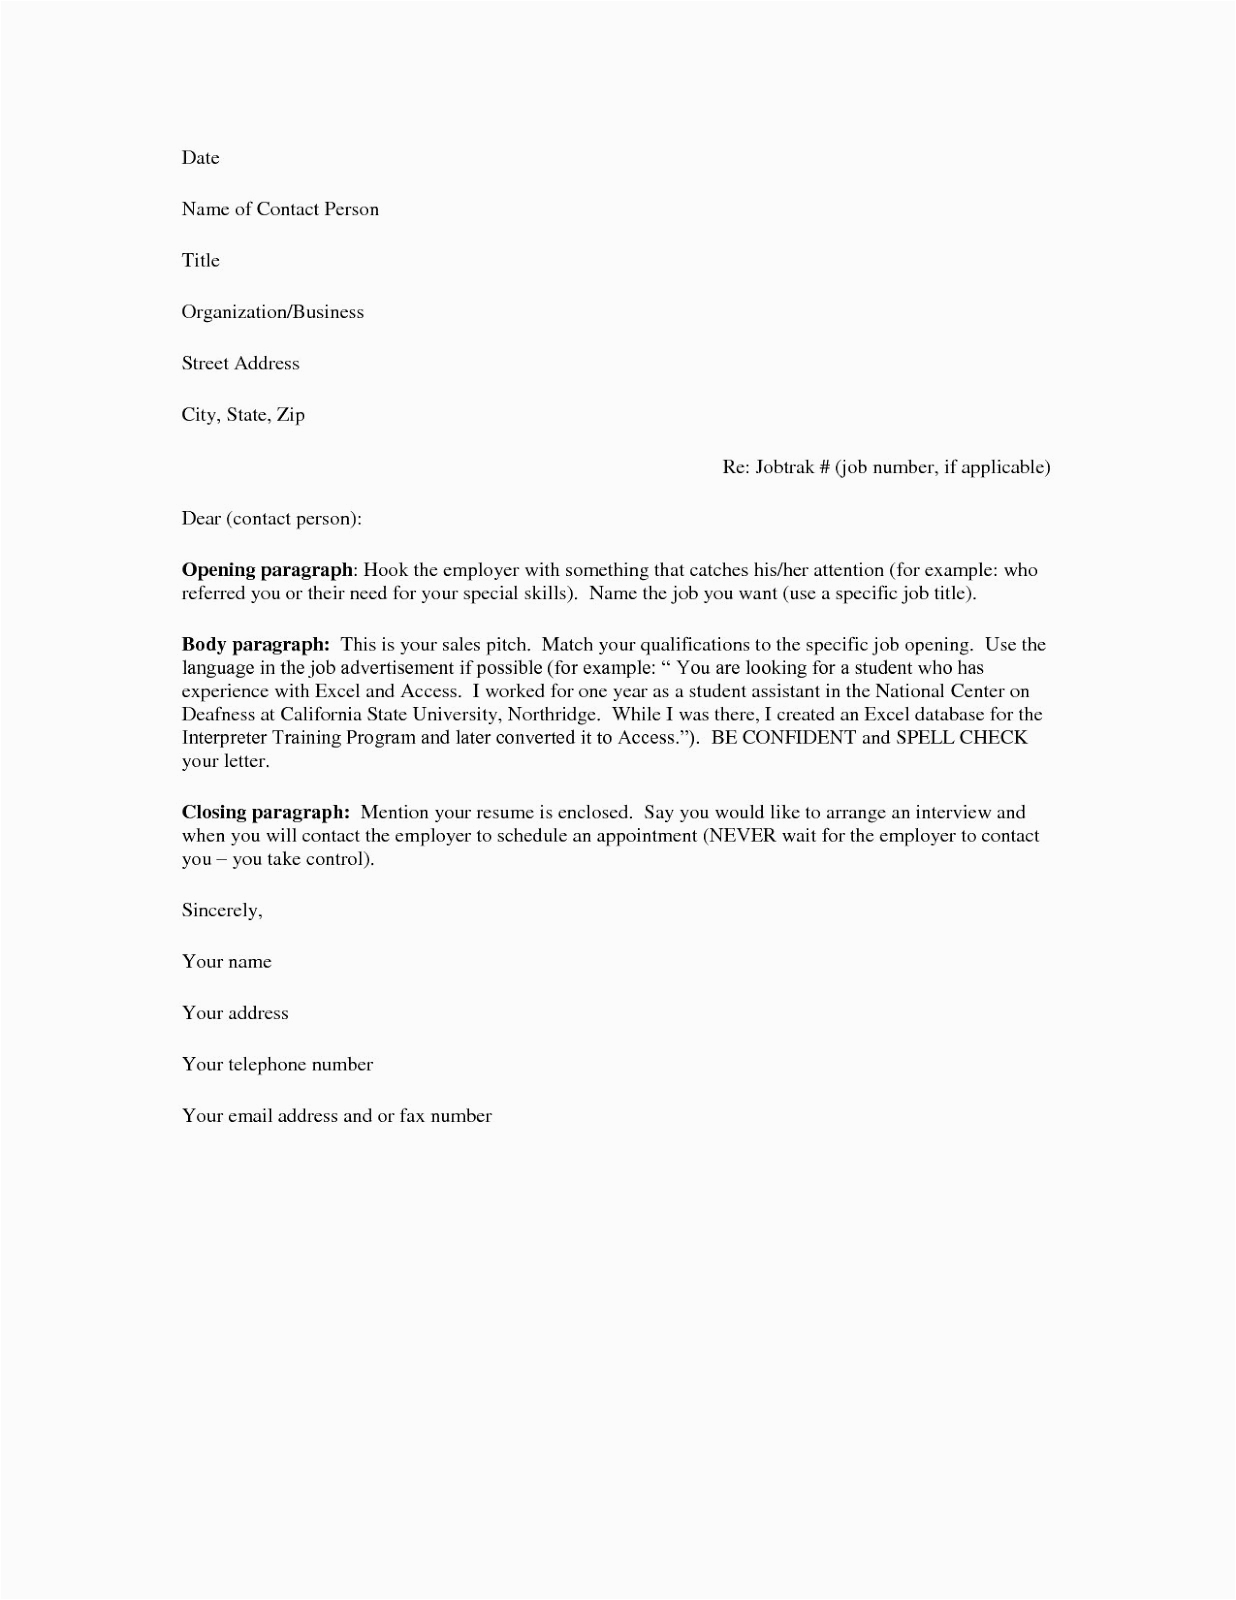 Samples Of Resumes and Cover Letters Free Free Cover Letter Samples for Resumes